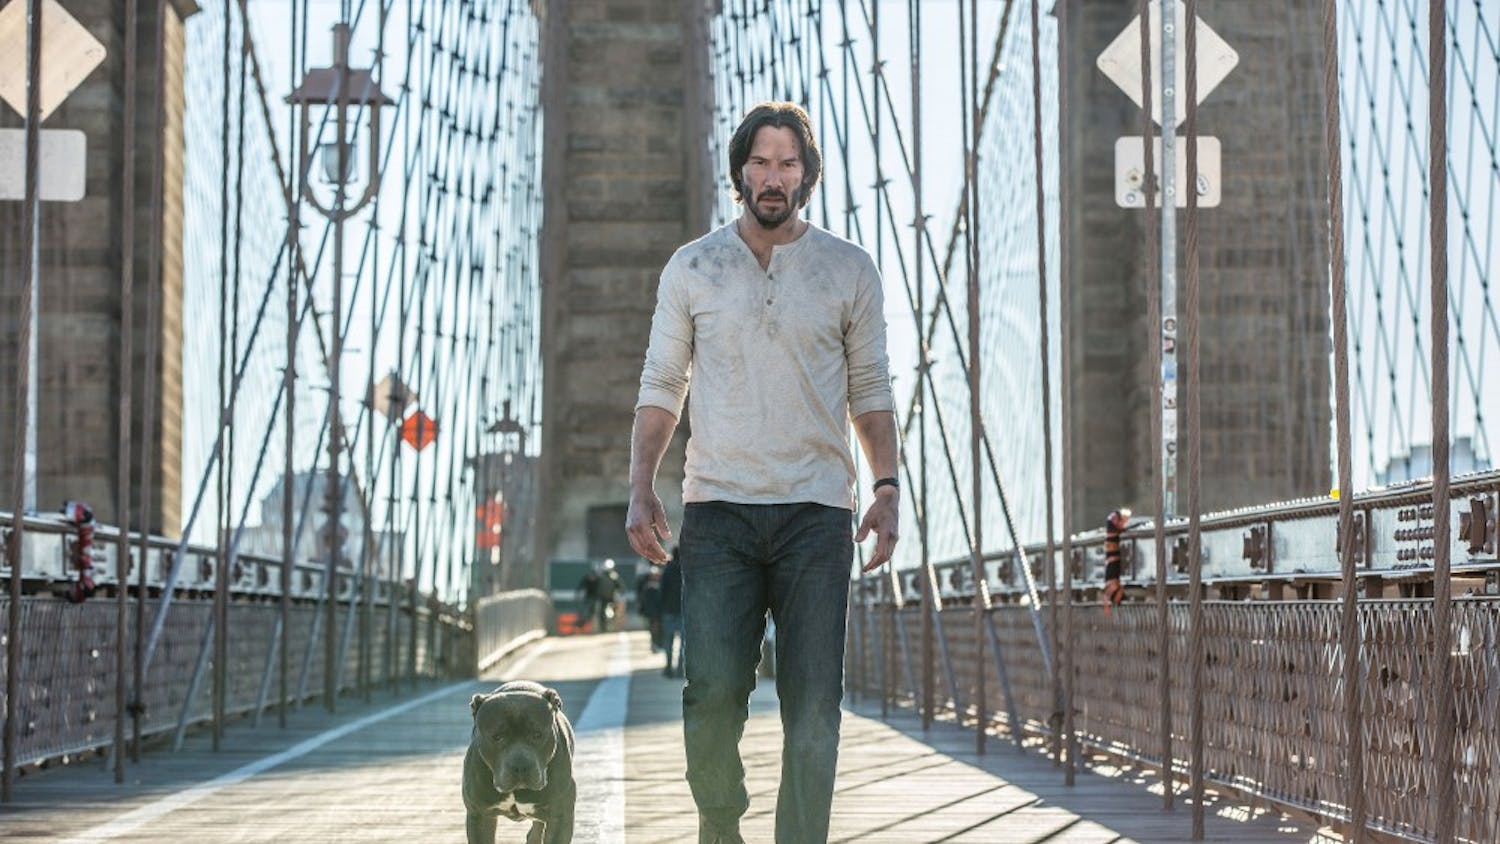 Keanu Reeves as John Wick in a scene from the movie "John Wick Chapter 2" directed by Chad Stahelski. (Niko Tavernise/Lionsgate/TNS)